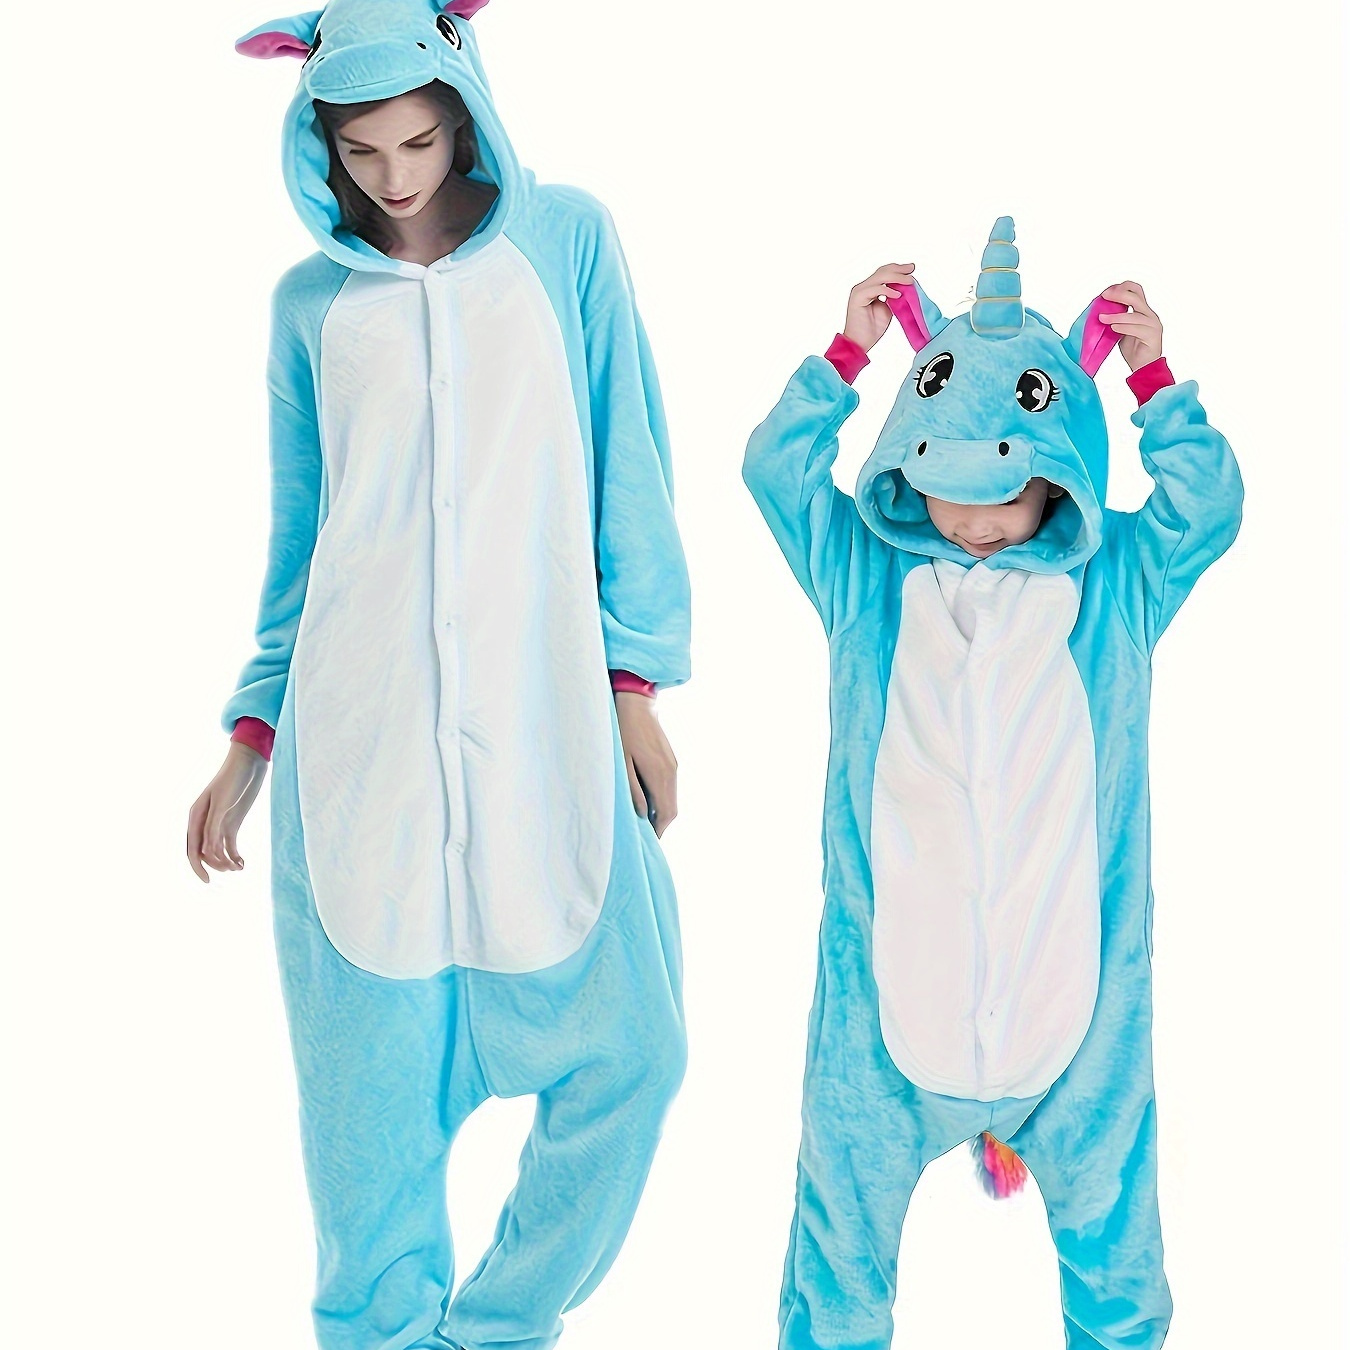 

Kid's Unicorn Hooded Rompers, Blue & White Color, Zip Up Flannel Jumpsuit, Cute Clothing For Boys & Girls